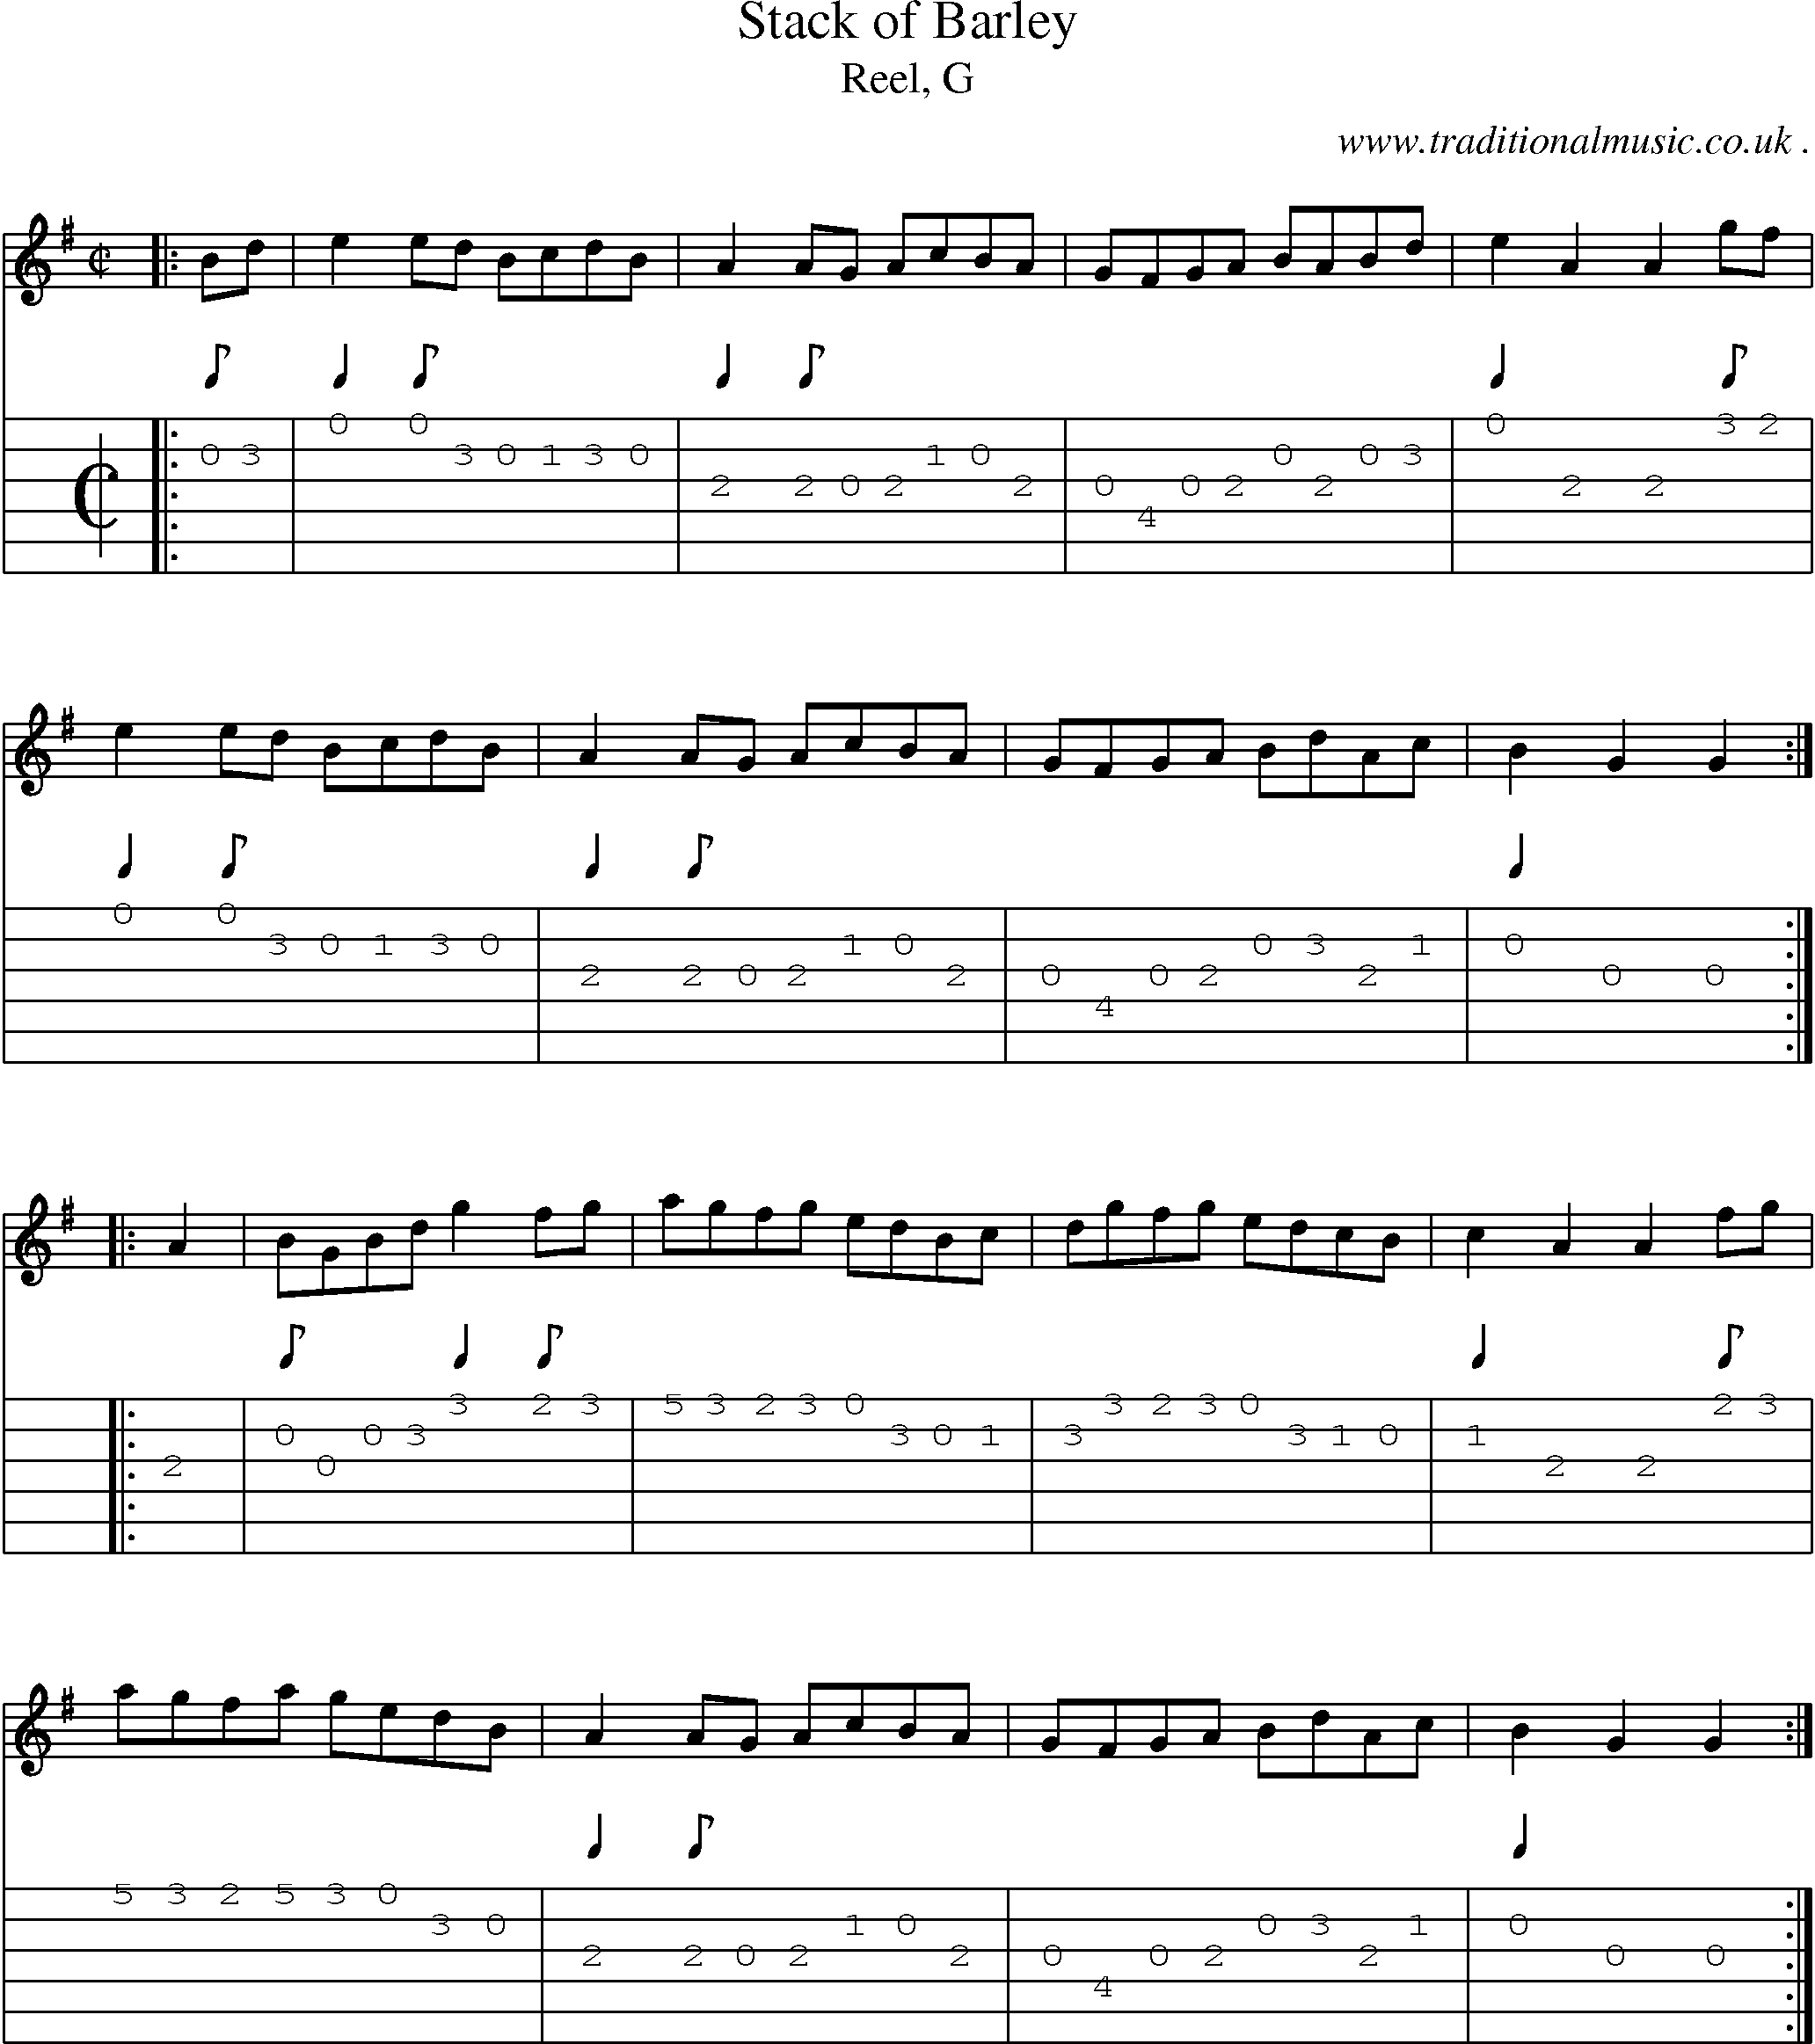 Sheet-music  score, Chords and Guitar Tabs for Stack Of Barley